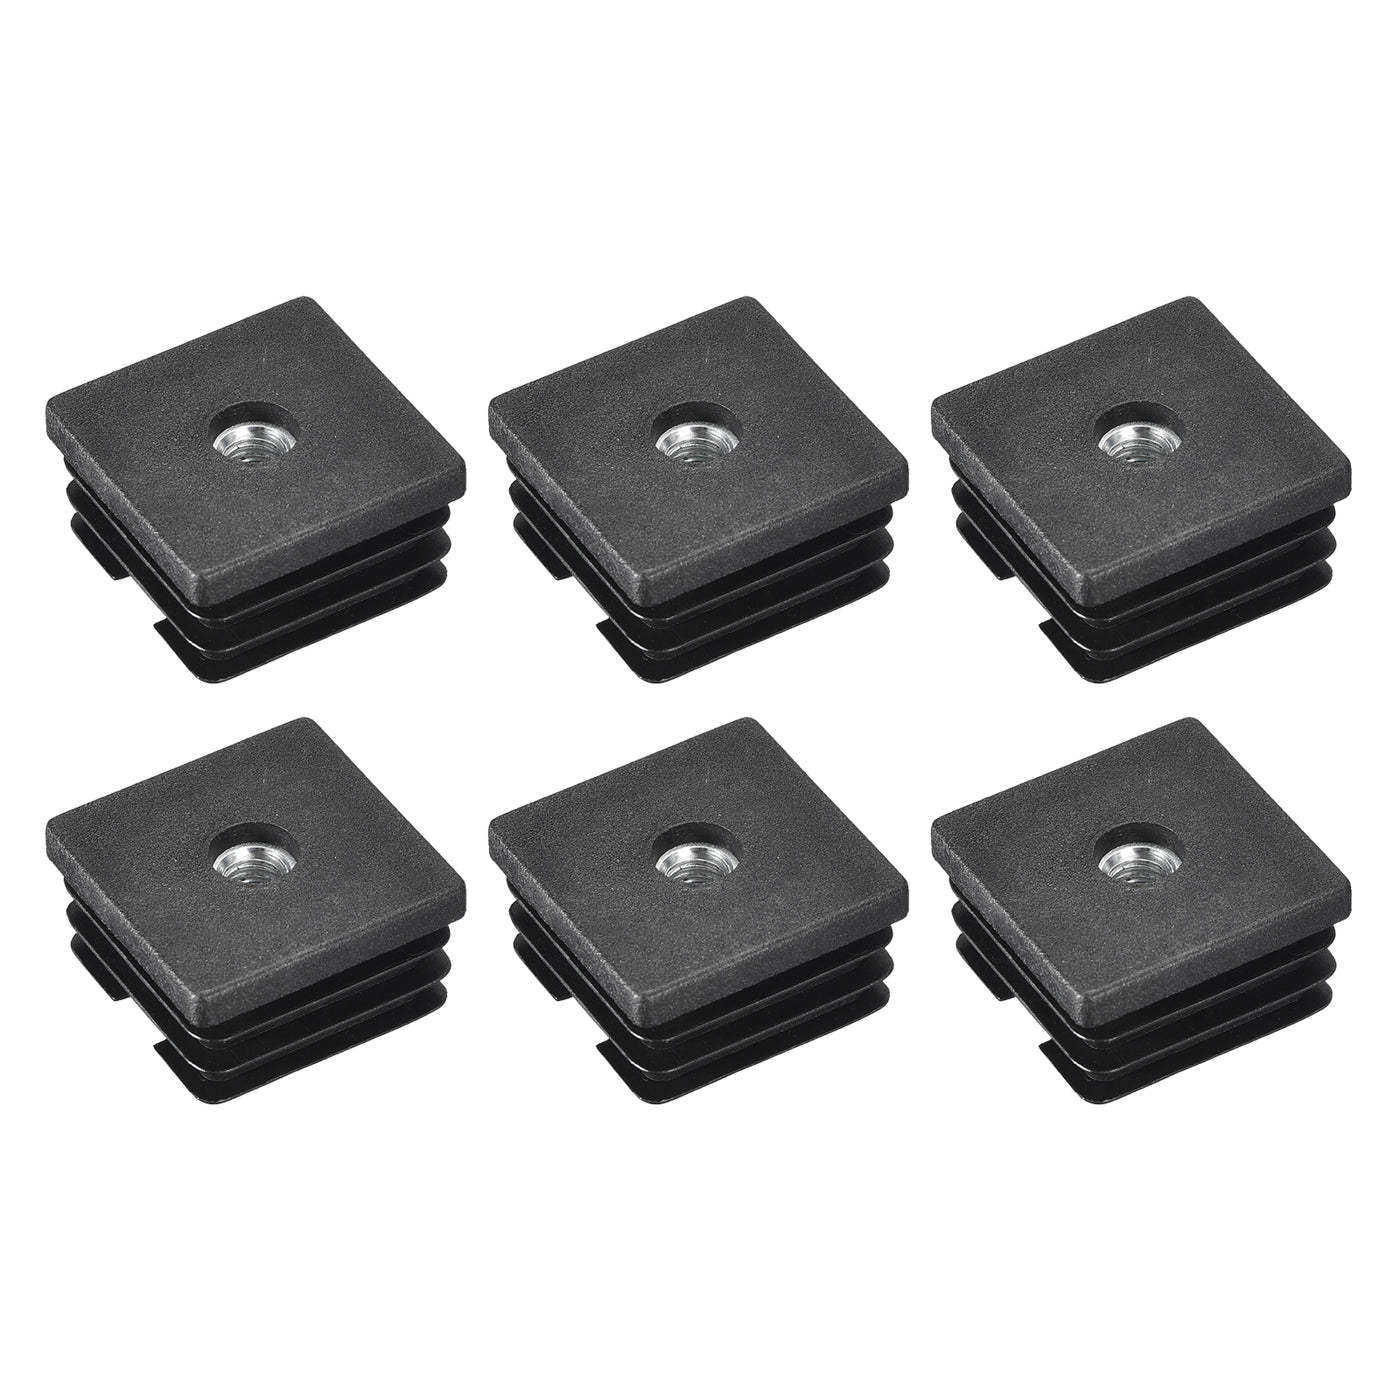 uxcell Uxcell 6Pcs 1.5"x1.5" Caster Insert with Thread, Square M8 Thread for Furniture